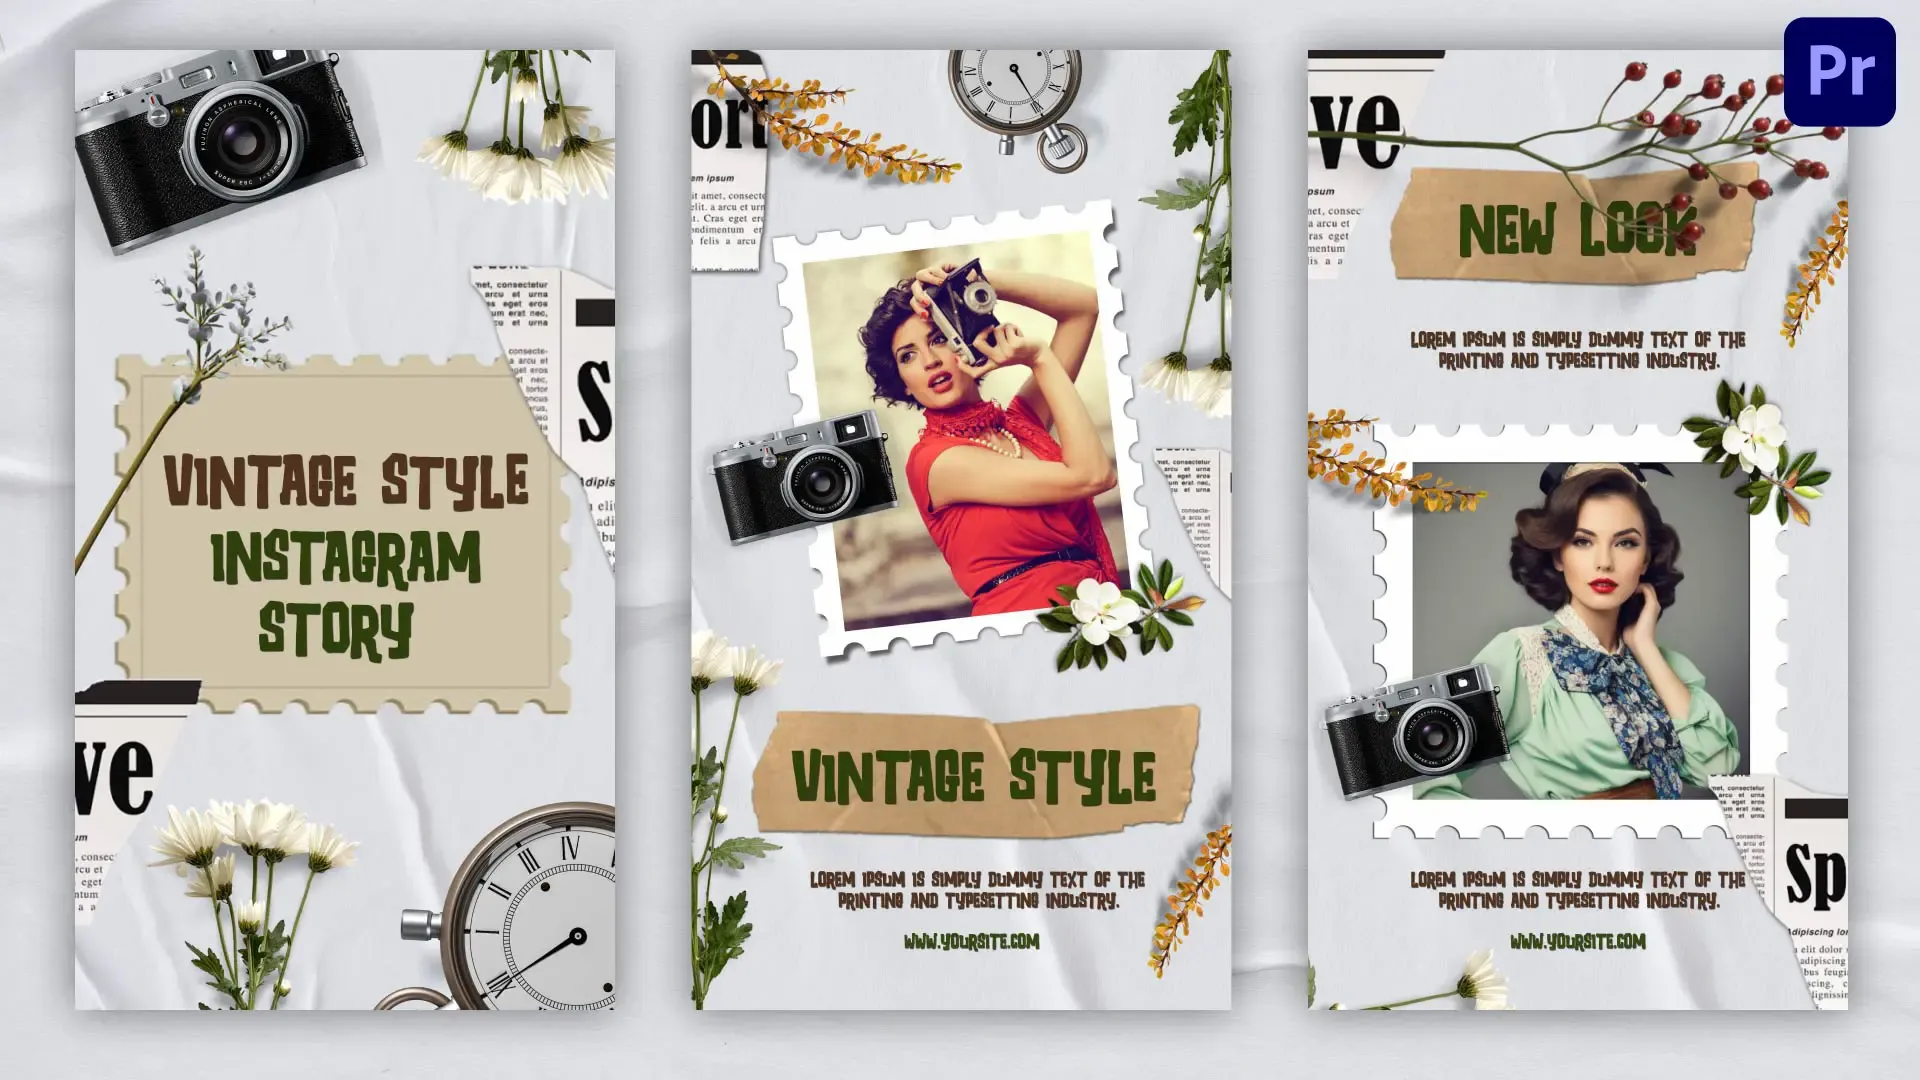 Vintage Fashion Style Paper Instagram Story